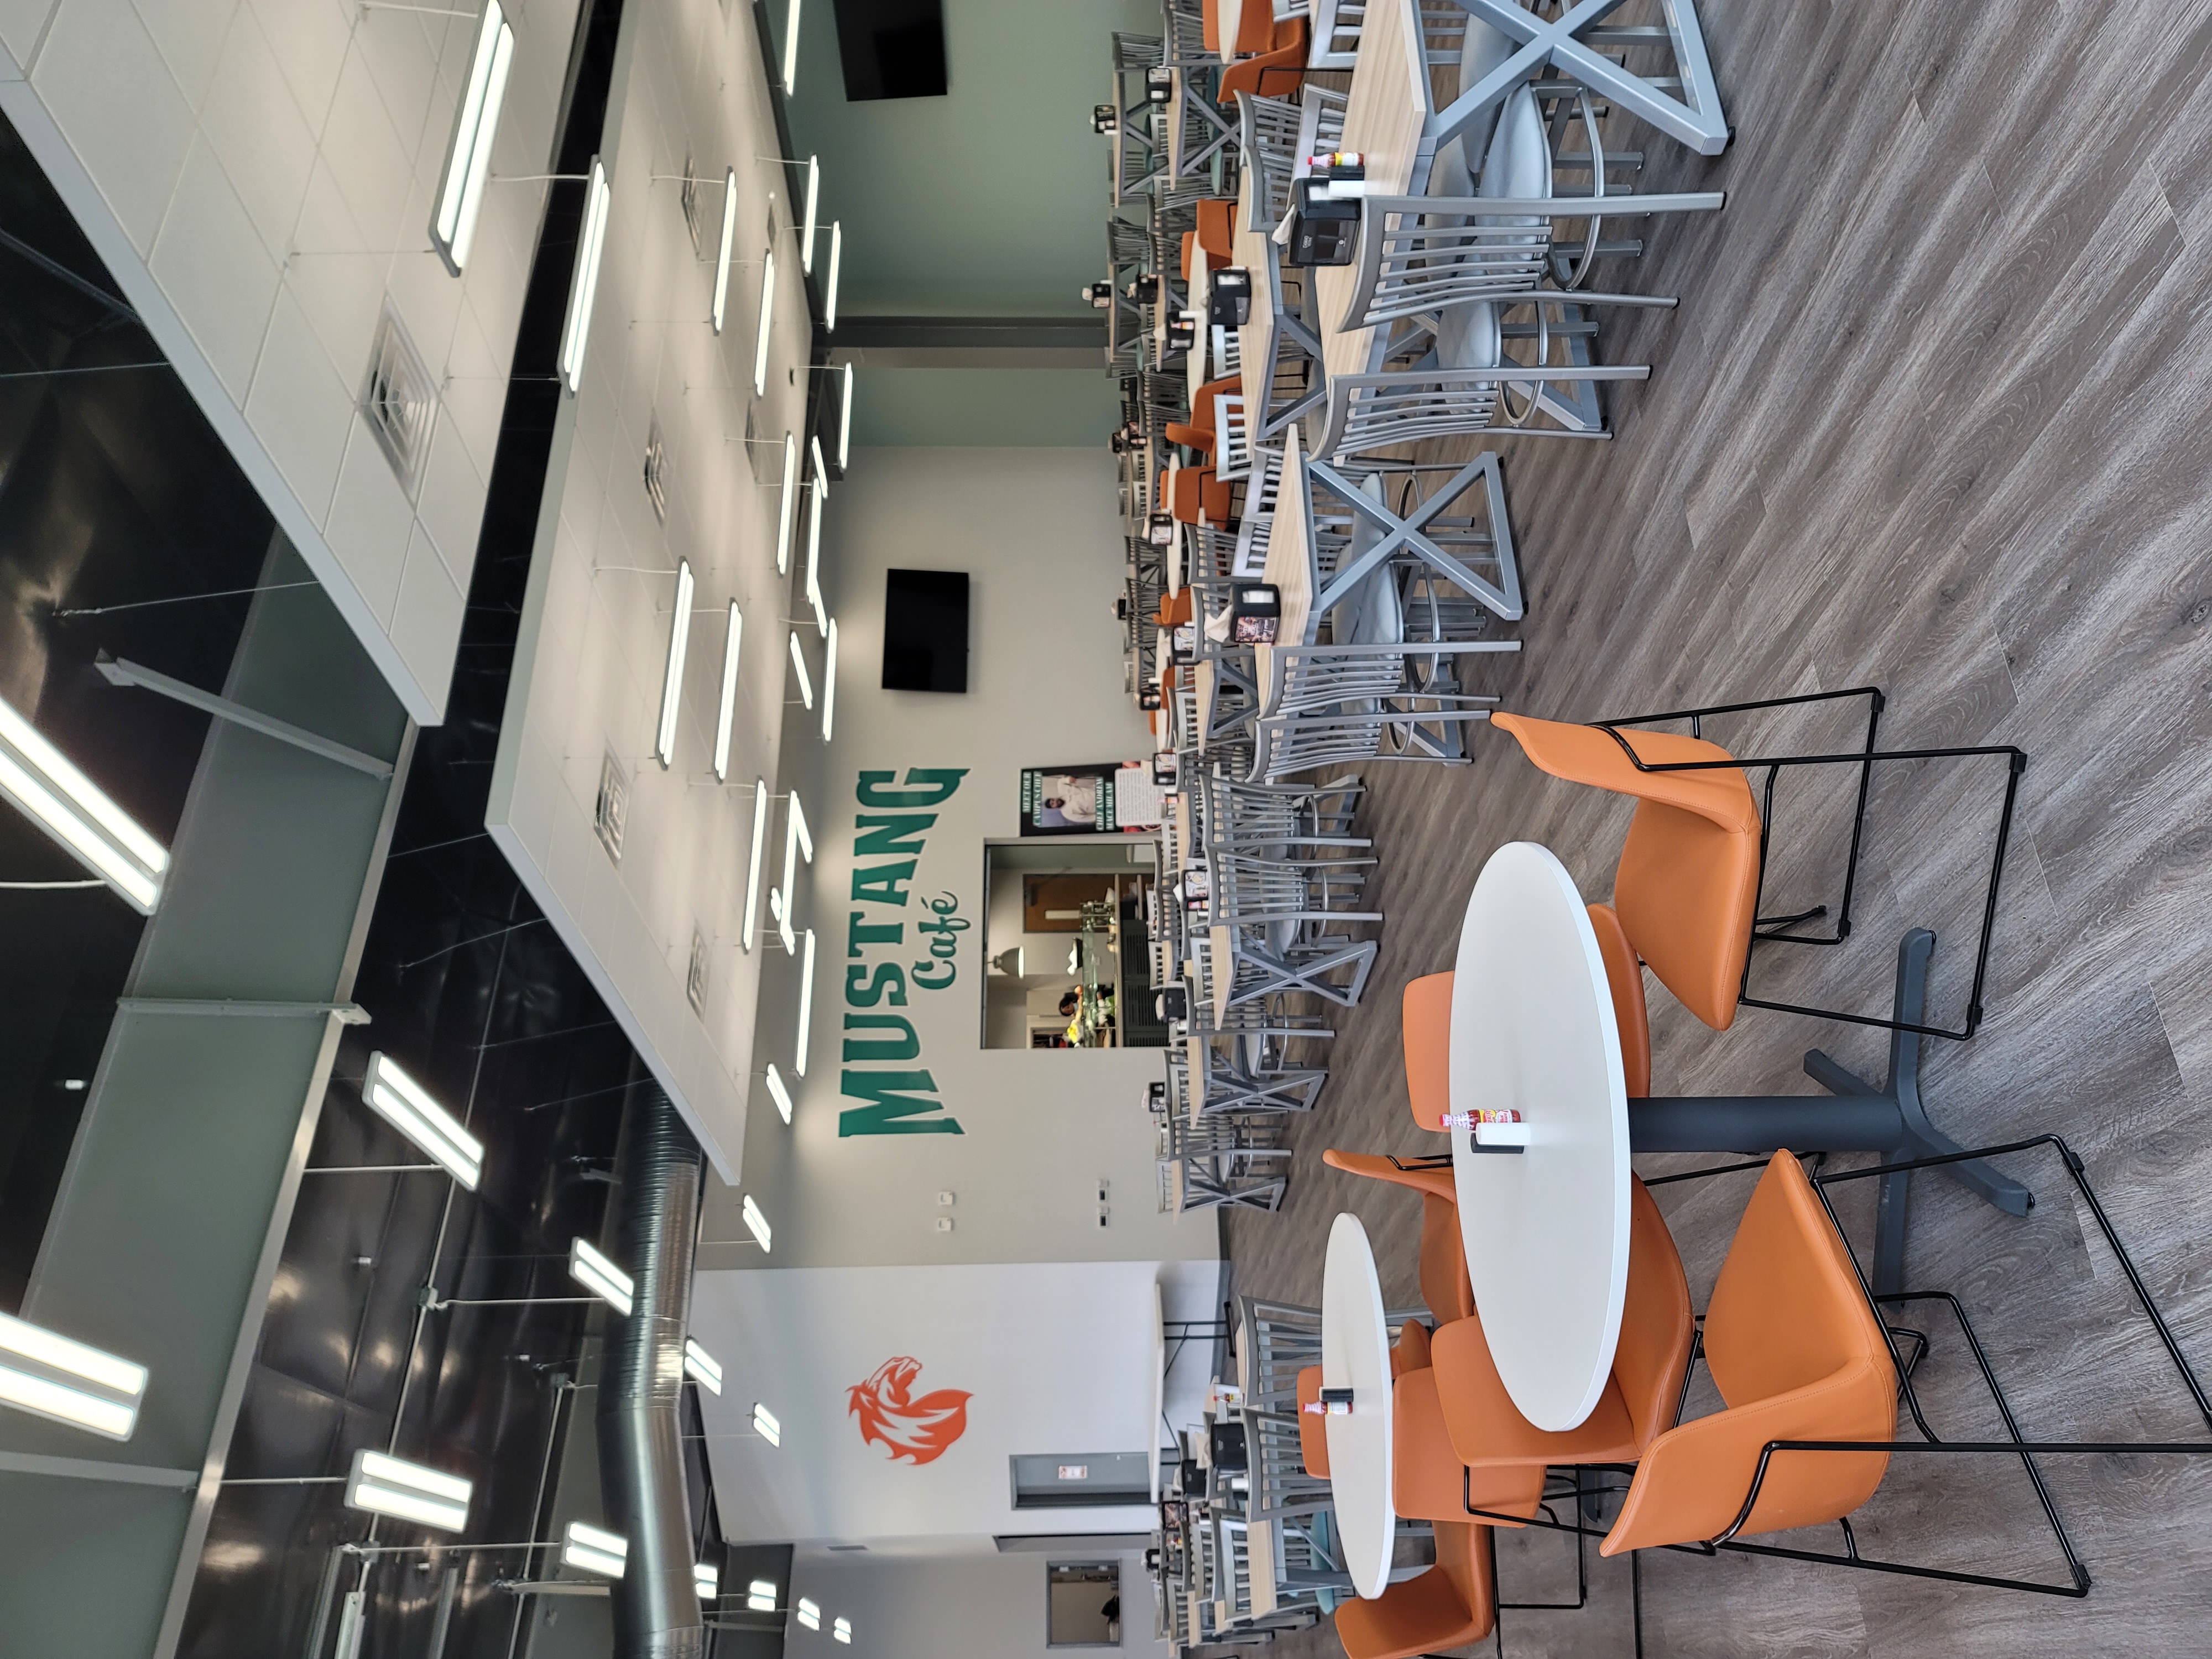 Mustang Cafe at Alligood Commons